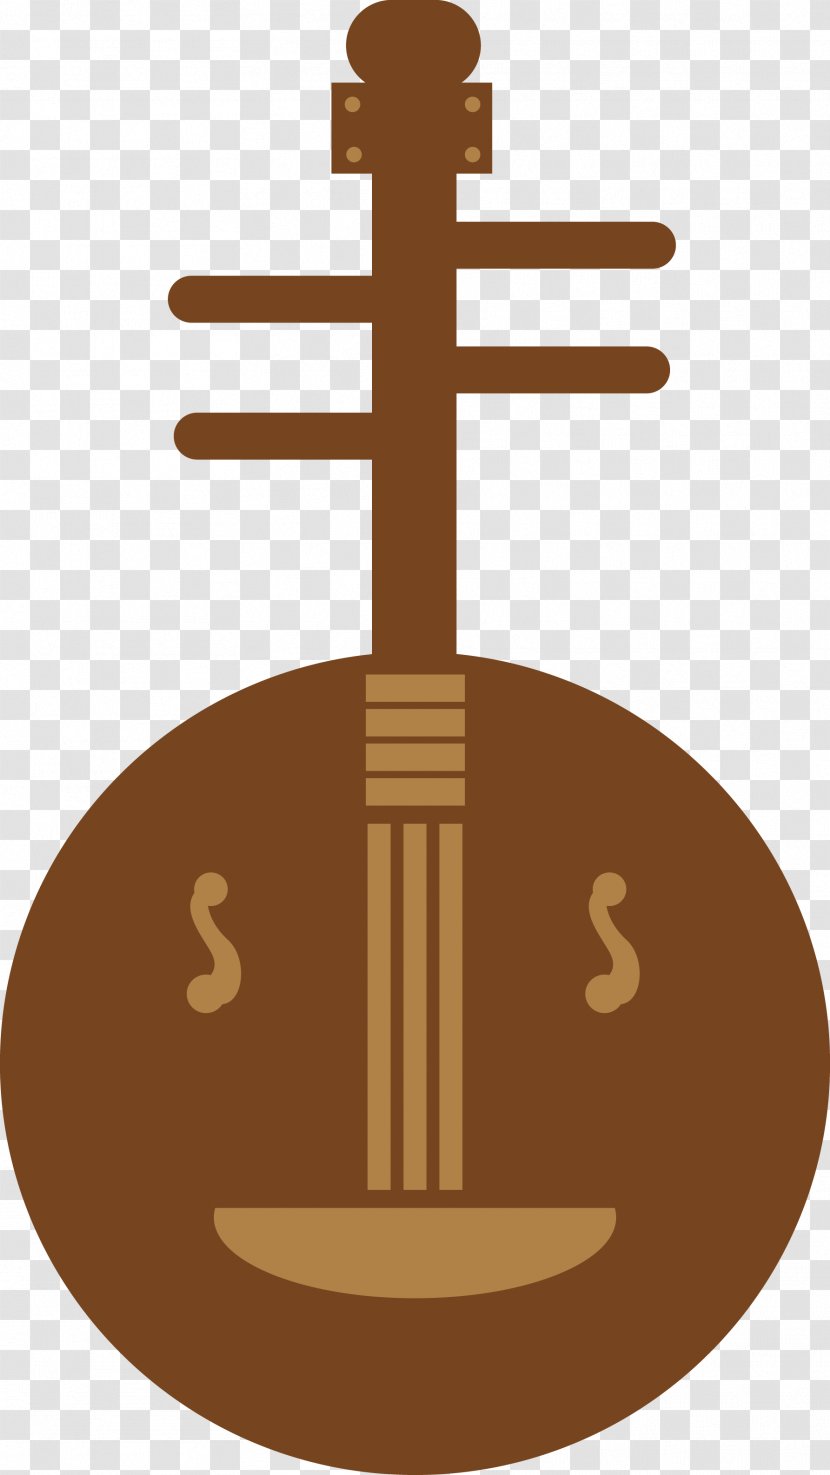 Yueqin Musical Instrument Silhouette - Chinese Classical Instruments Vector Transparent PNG